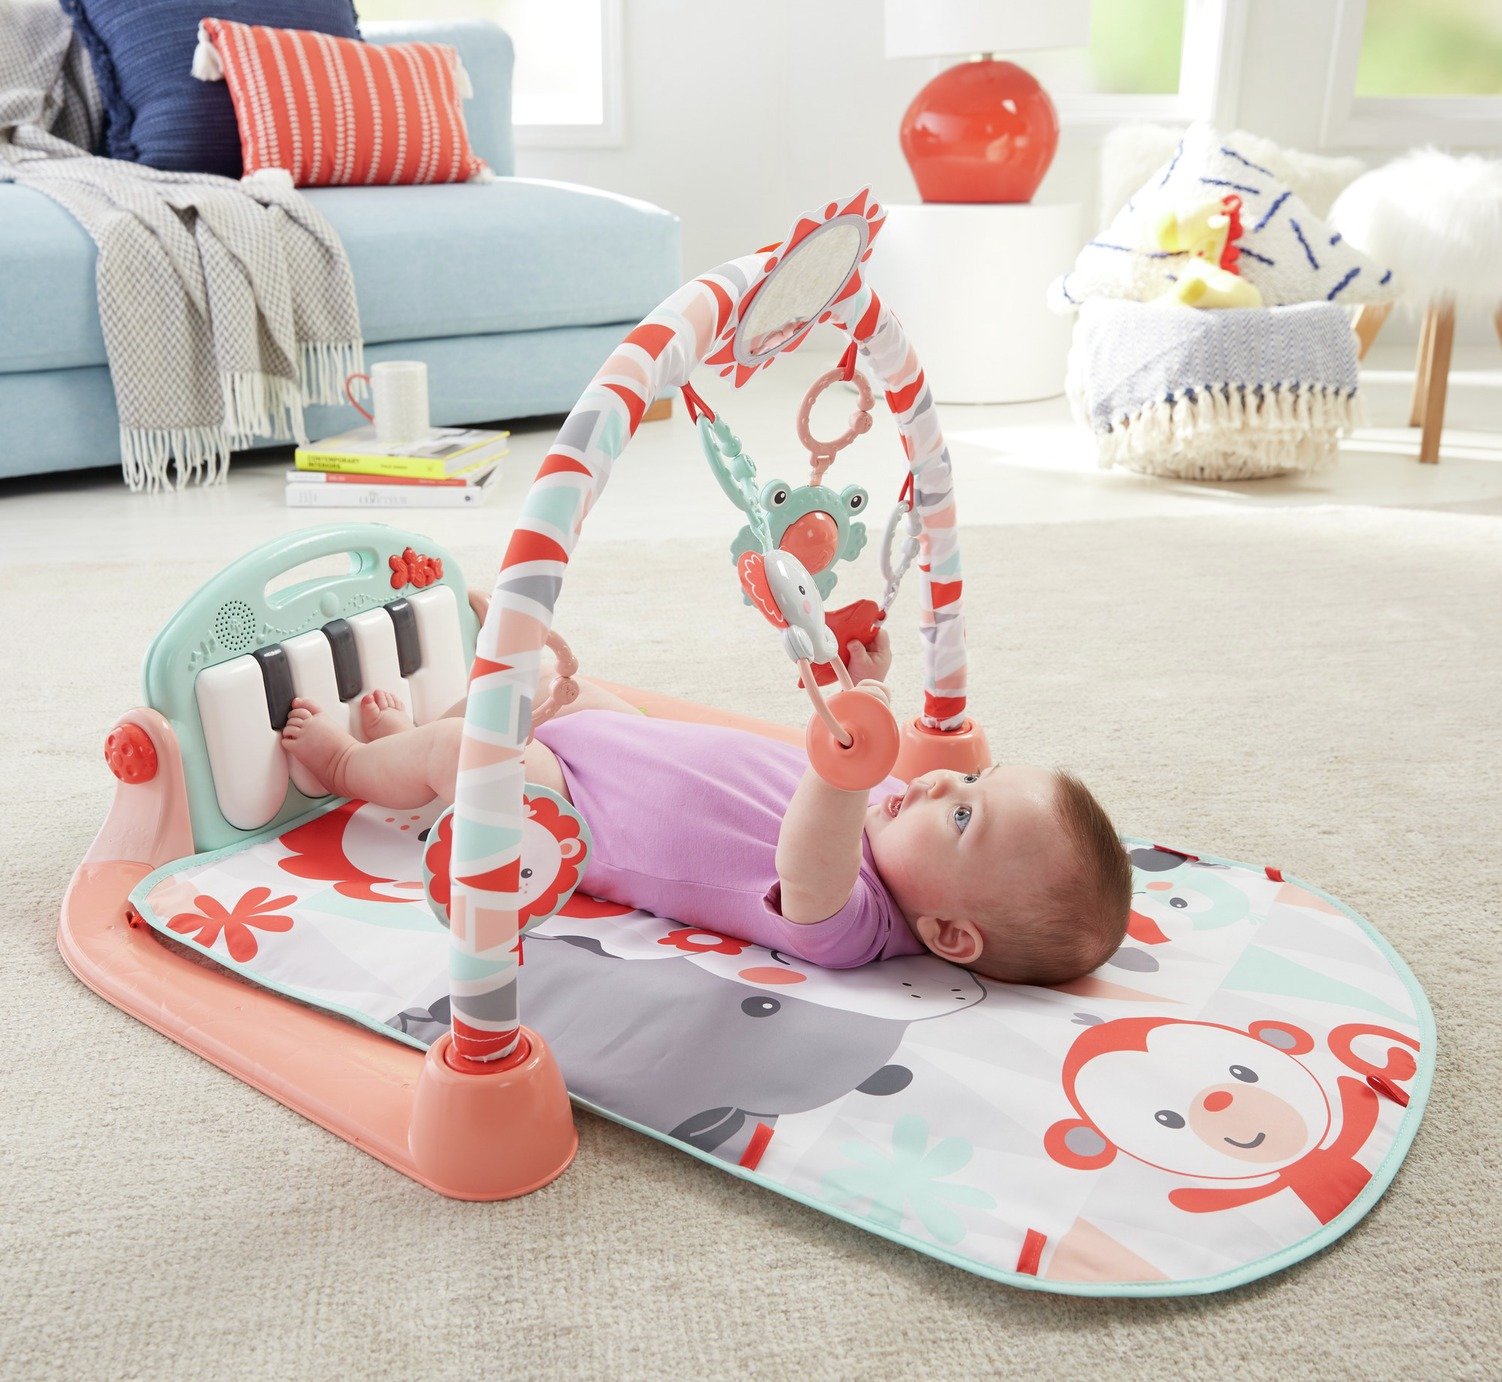 Fisher-Price Deluxe Kick & Play Pink Piano Gym 